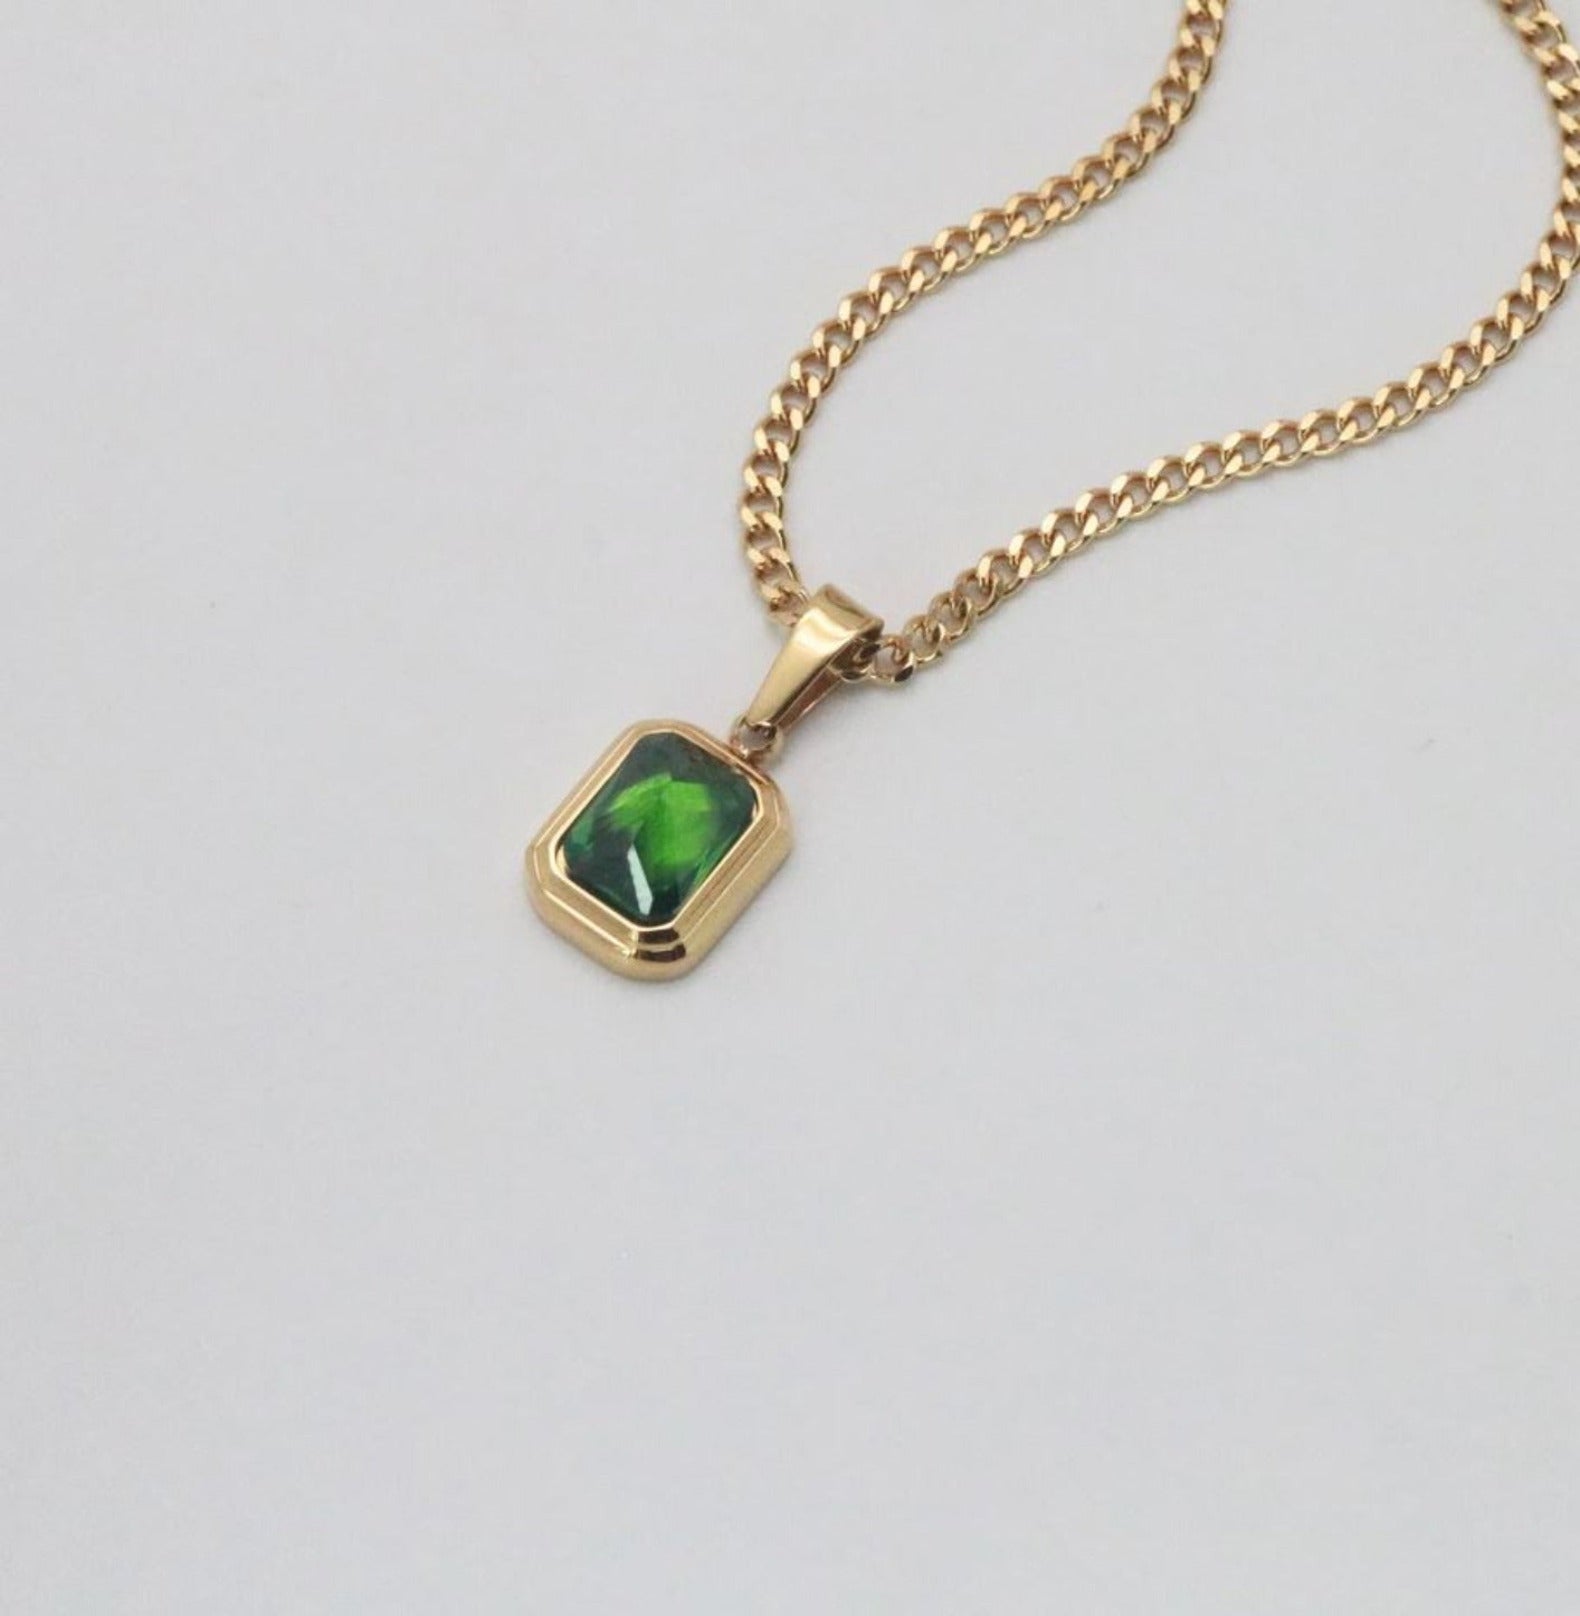 GEM PENDANT NECKLACE neck Yubama Jewelry Online Store - The Elegant Designs of Gold and Silver ! 